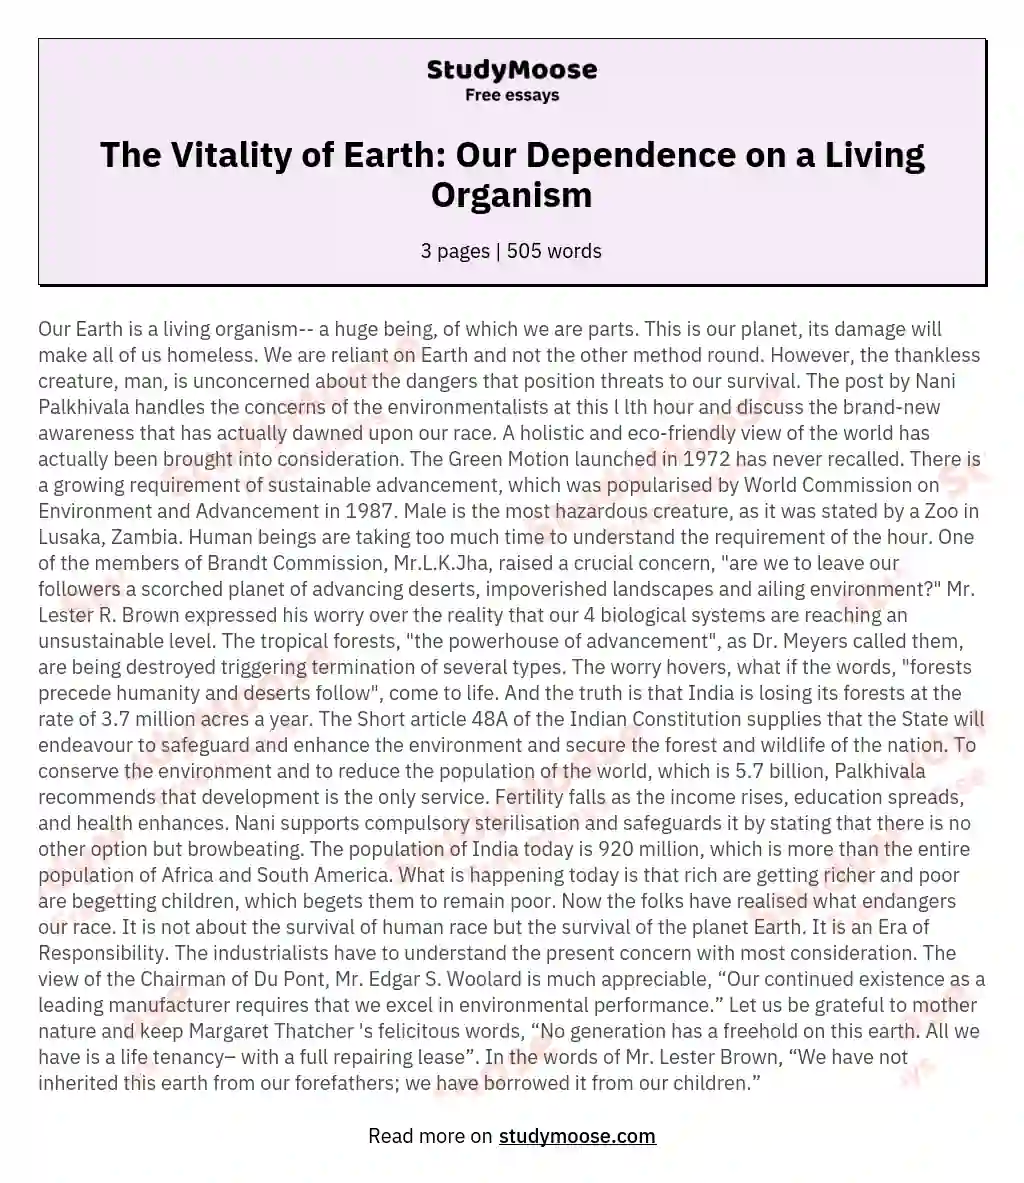 The Vitality of Earth: Our Dependence on a Living Organism essay